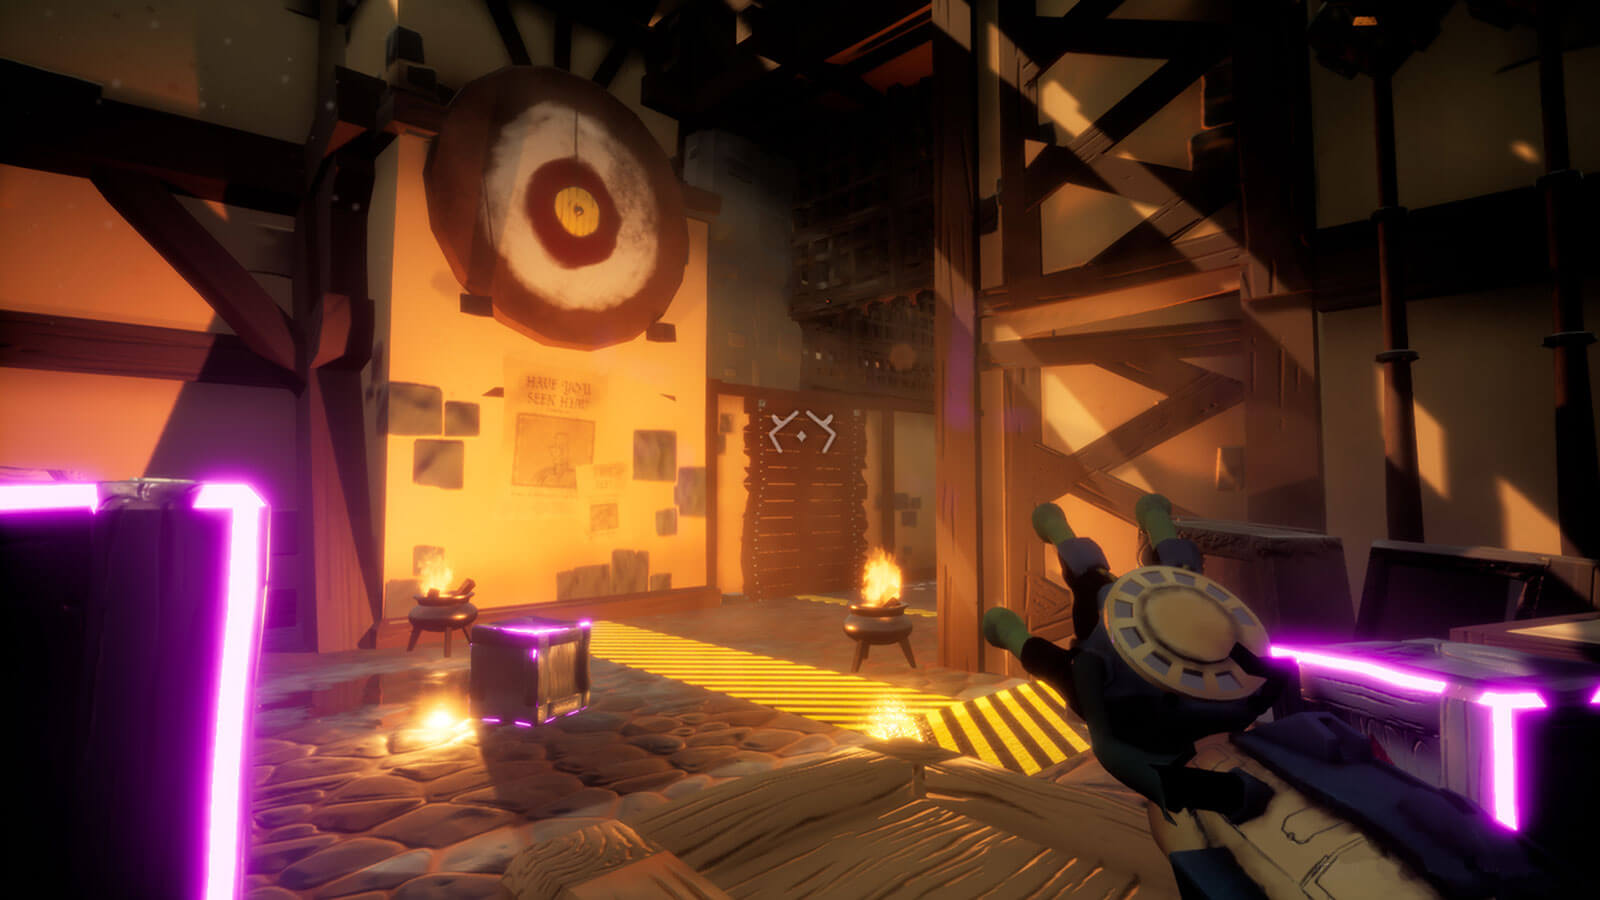 1st-person view of player manipulating a block inside a wooden room